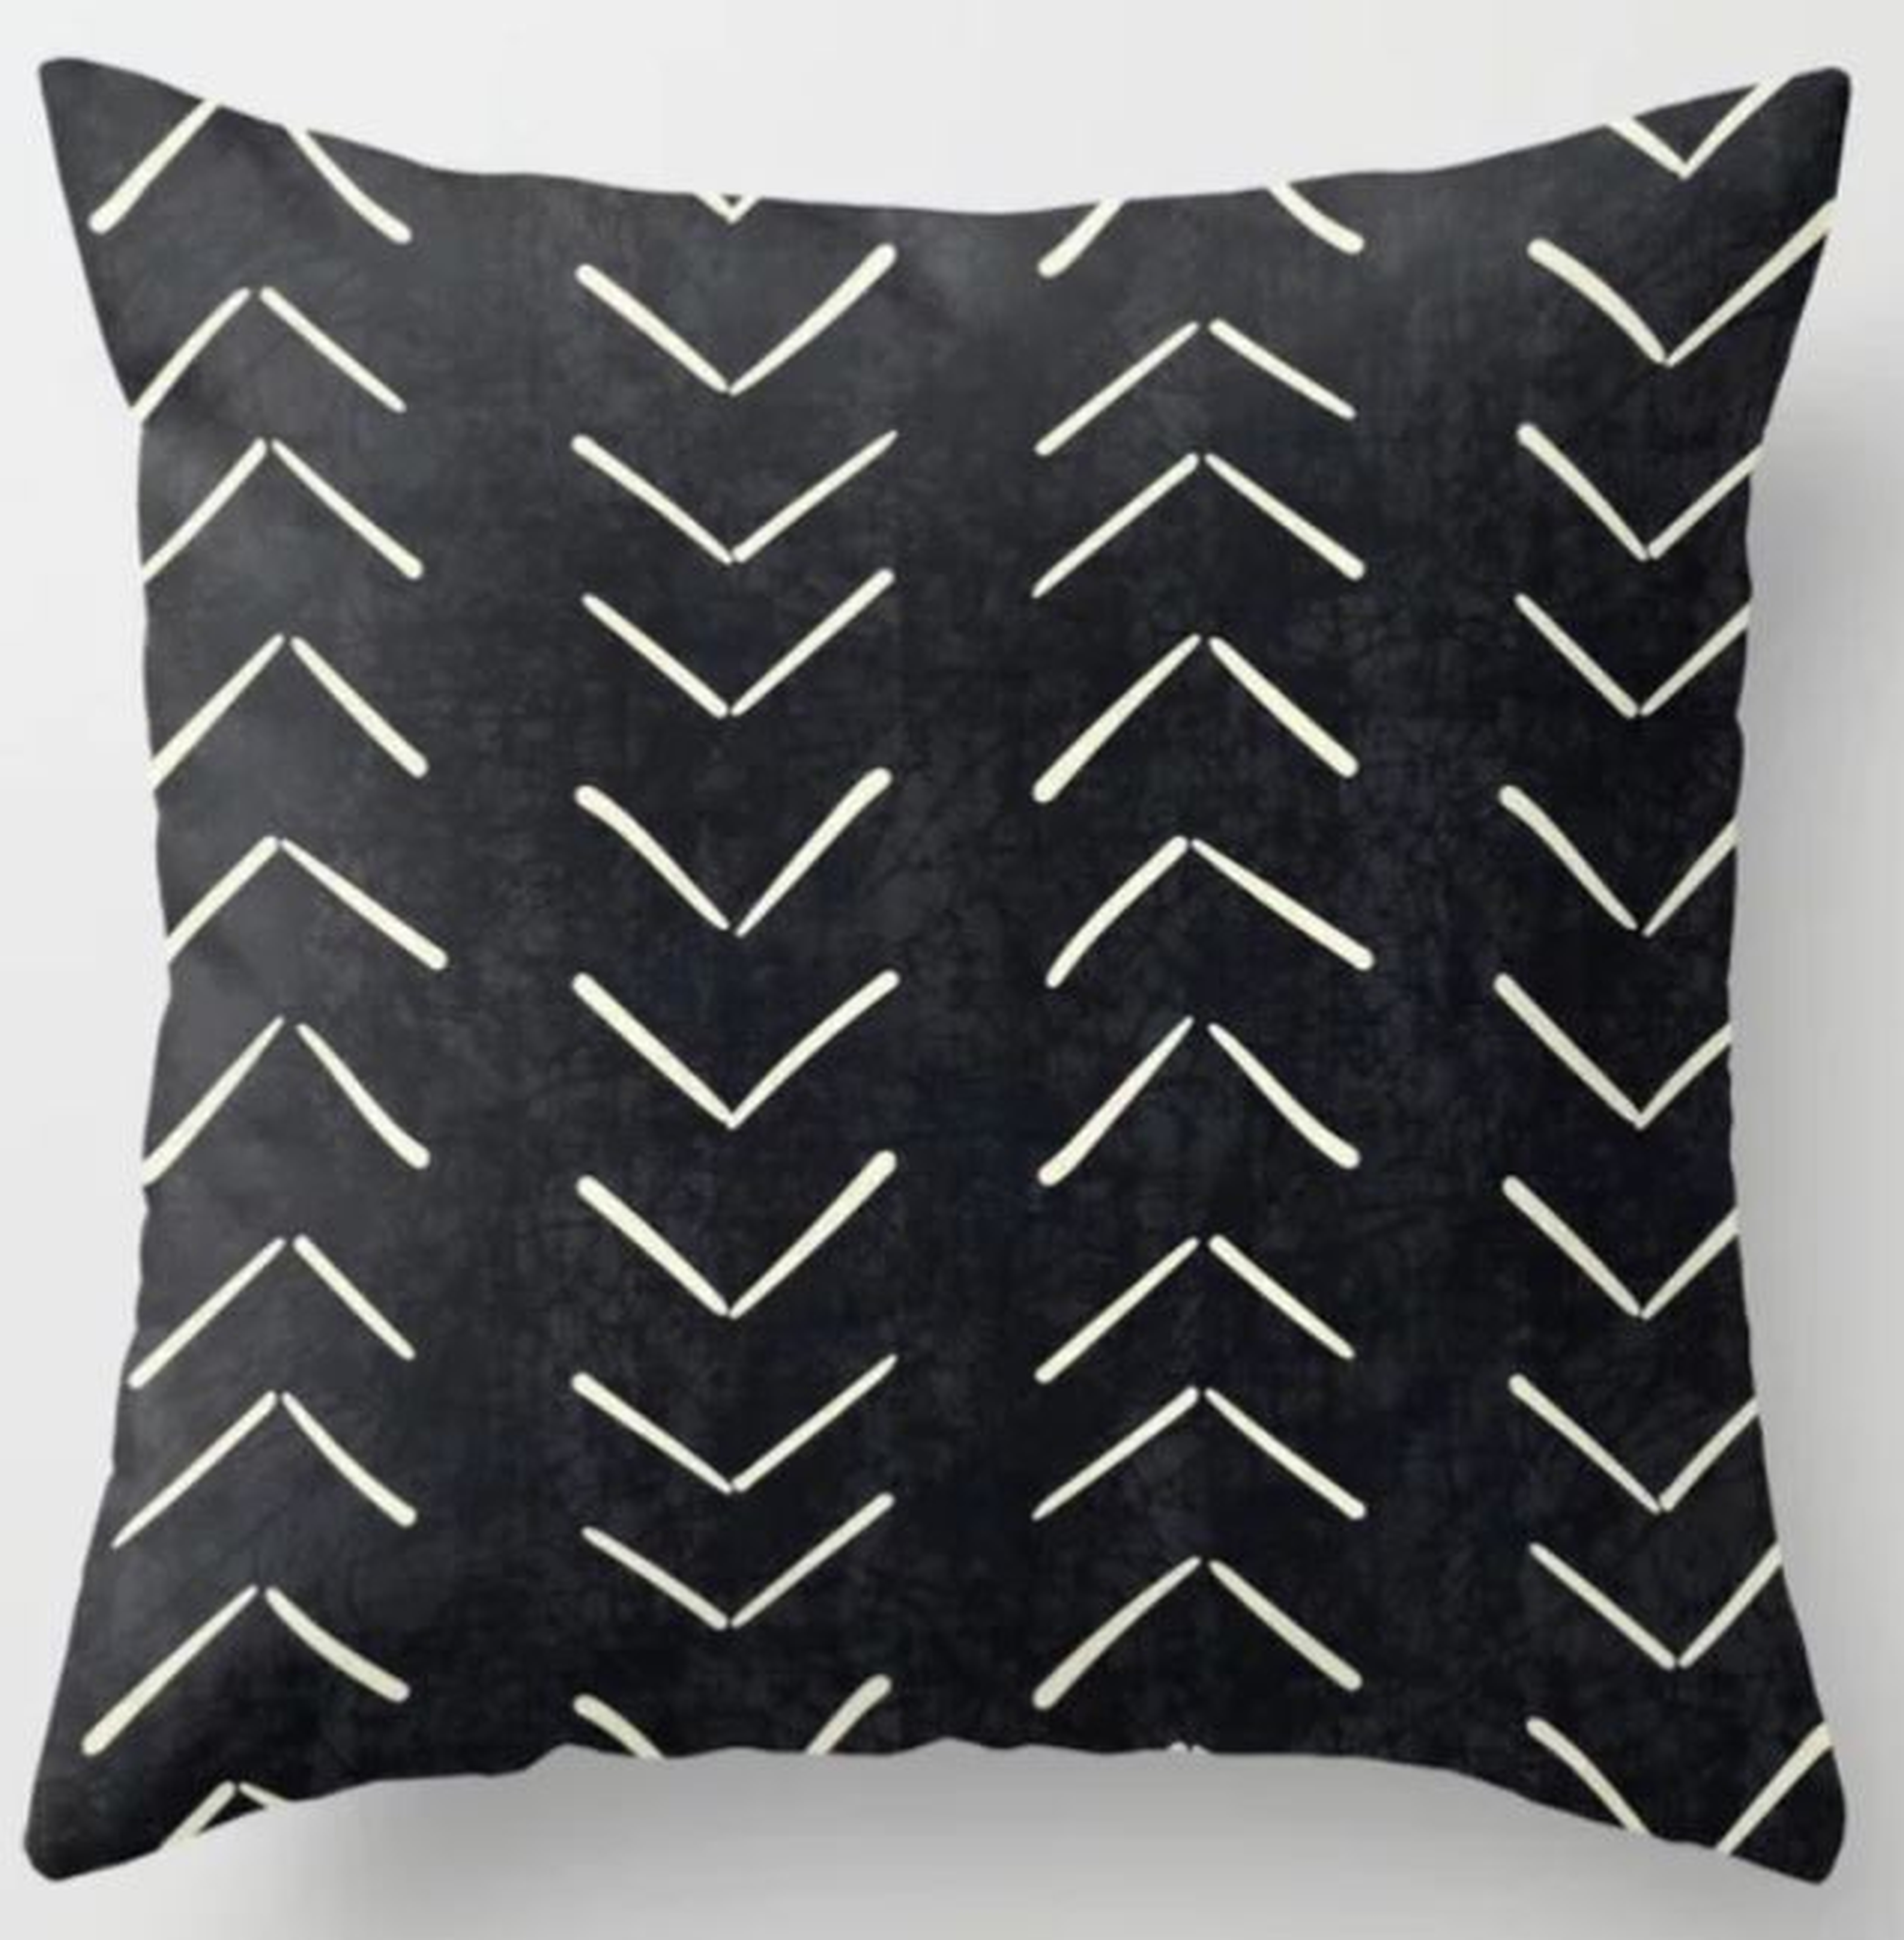 Mudcloth Big Arrows in Black and White Throw Pillow - Society6